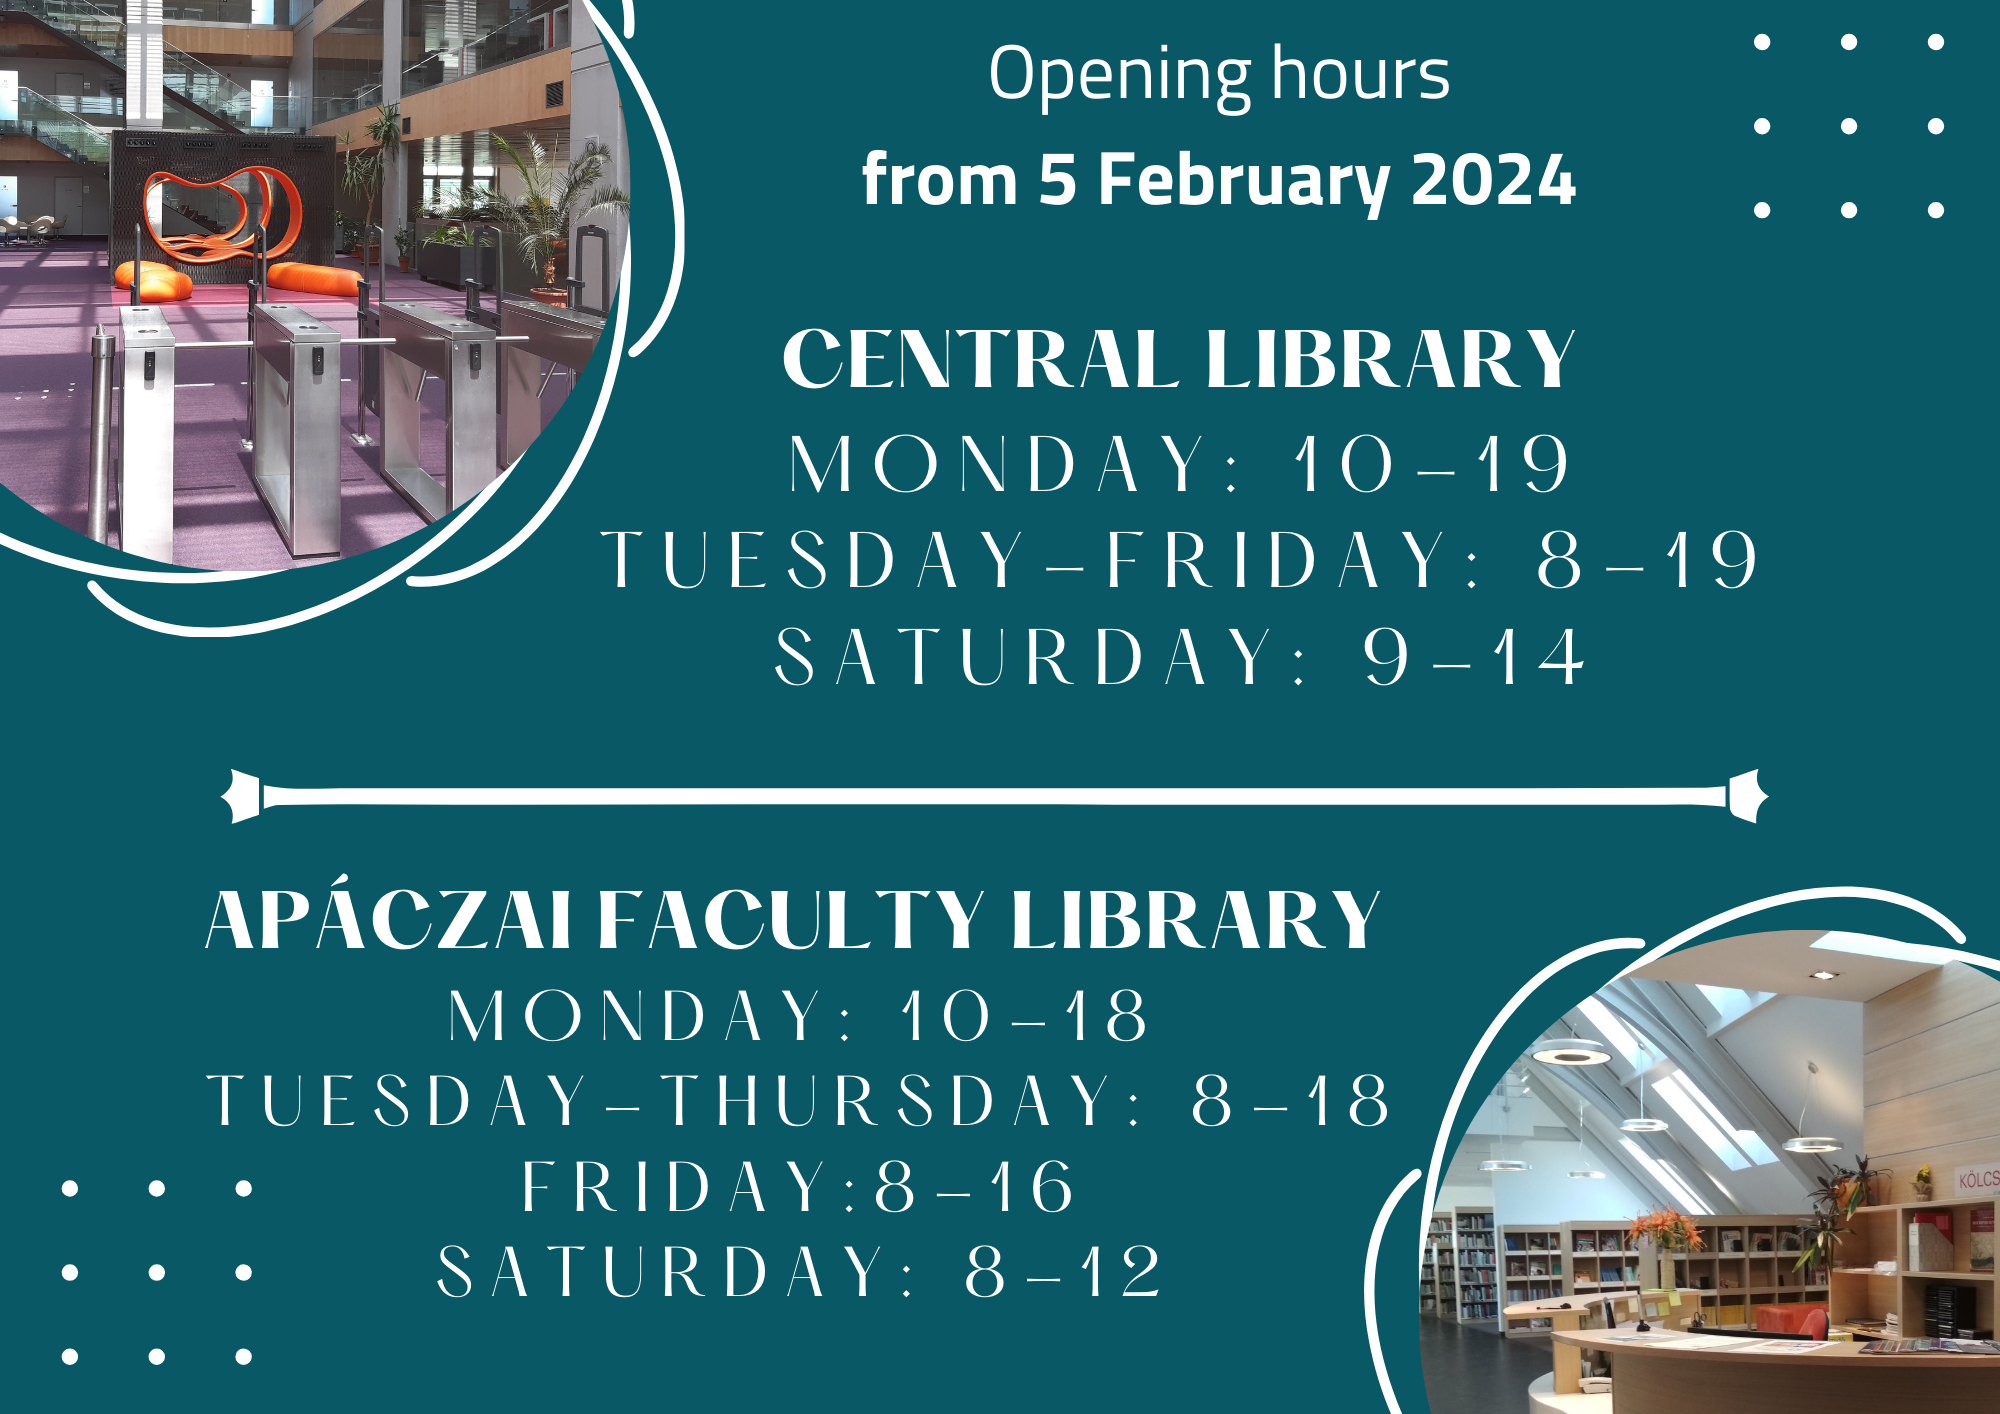 Opening hours from 5 February 2024